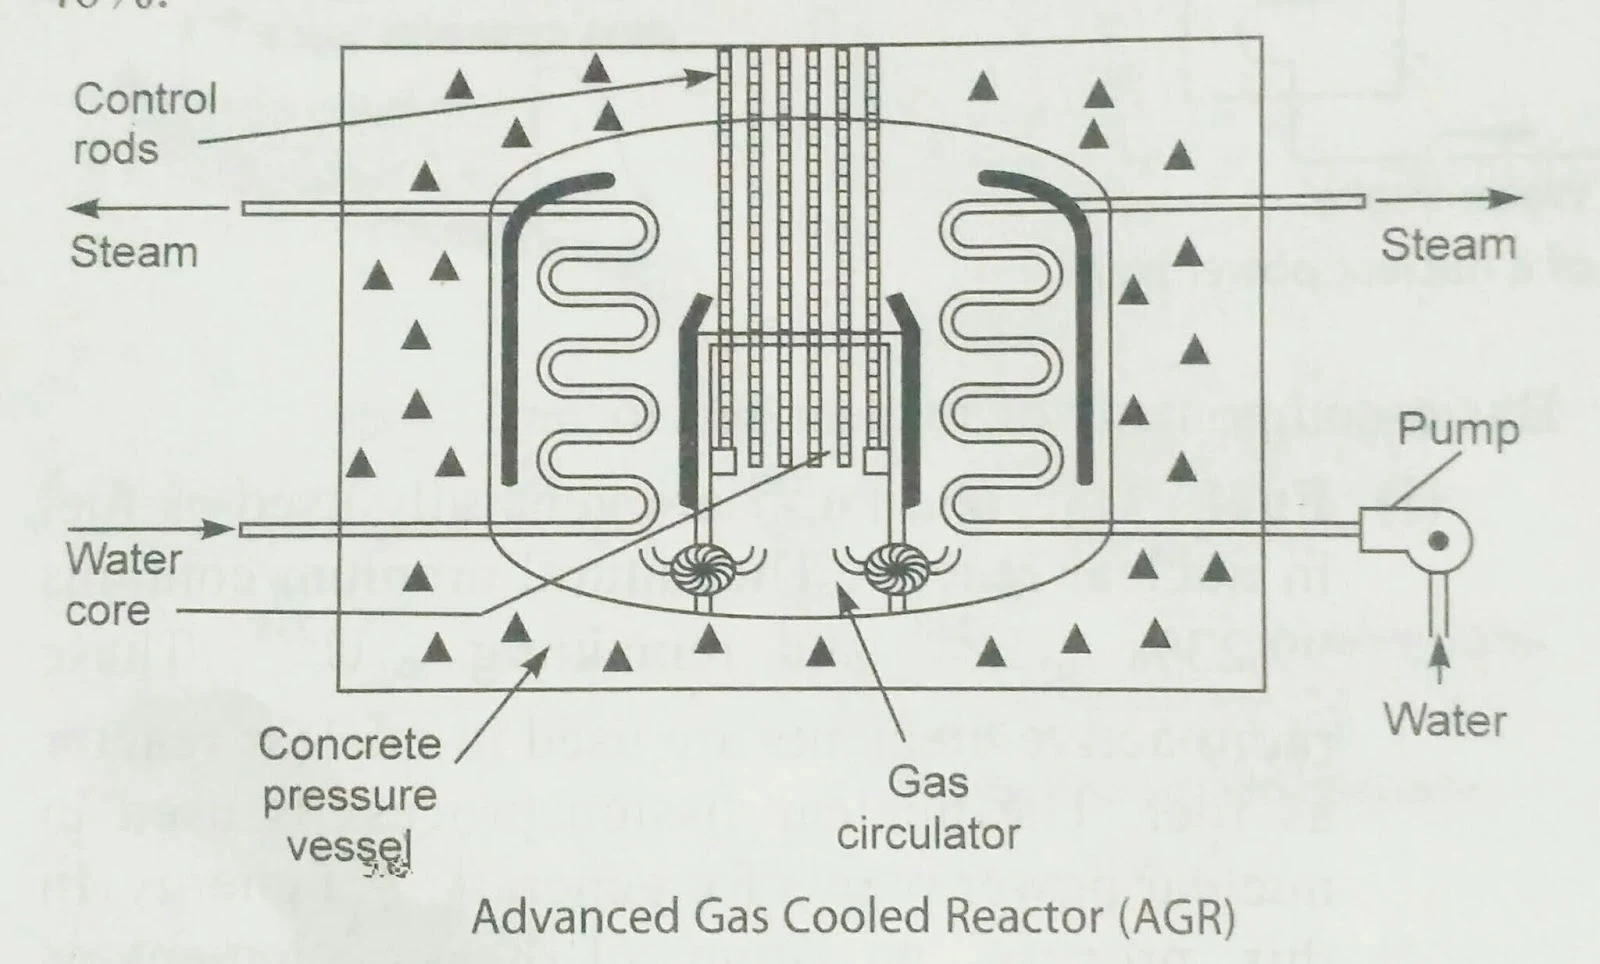 main parts of nuclear power plant